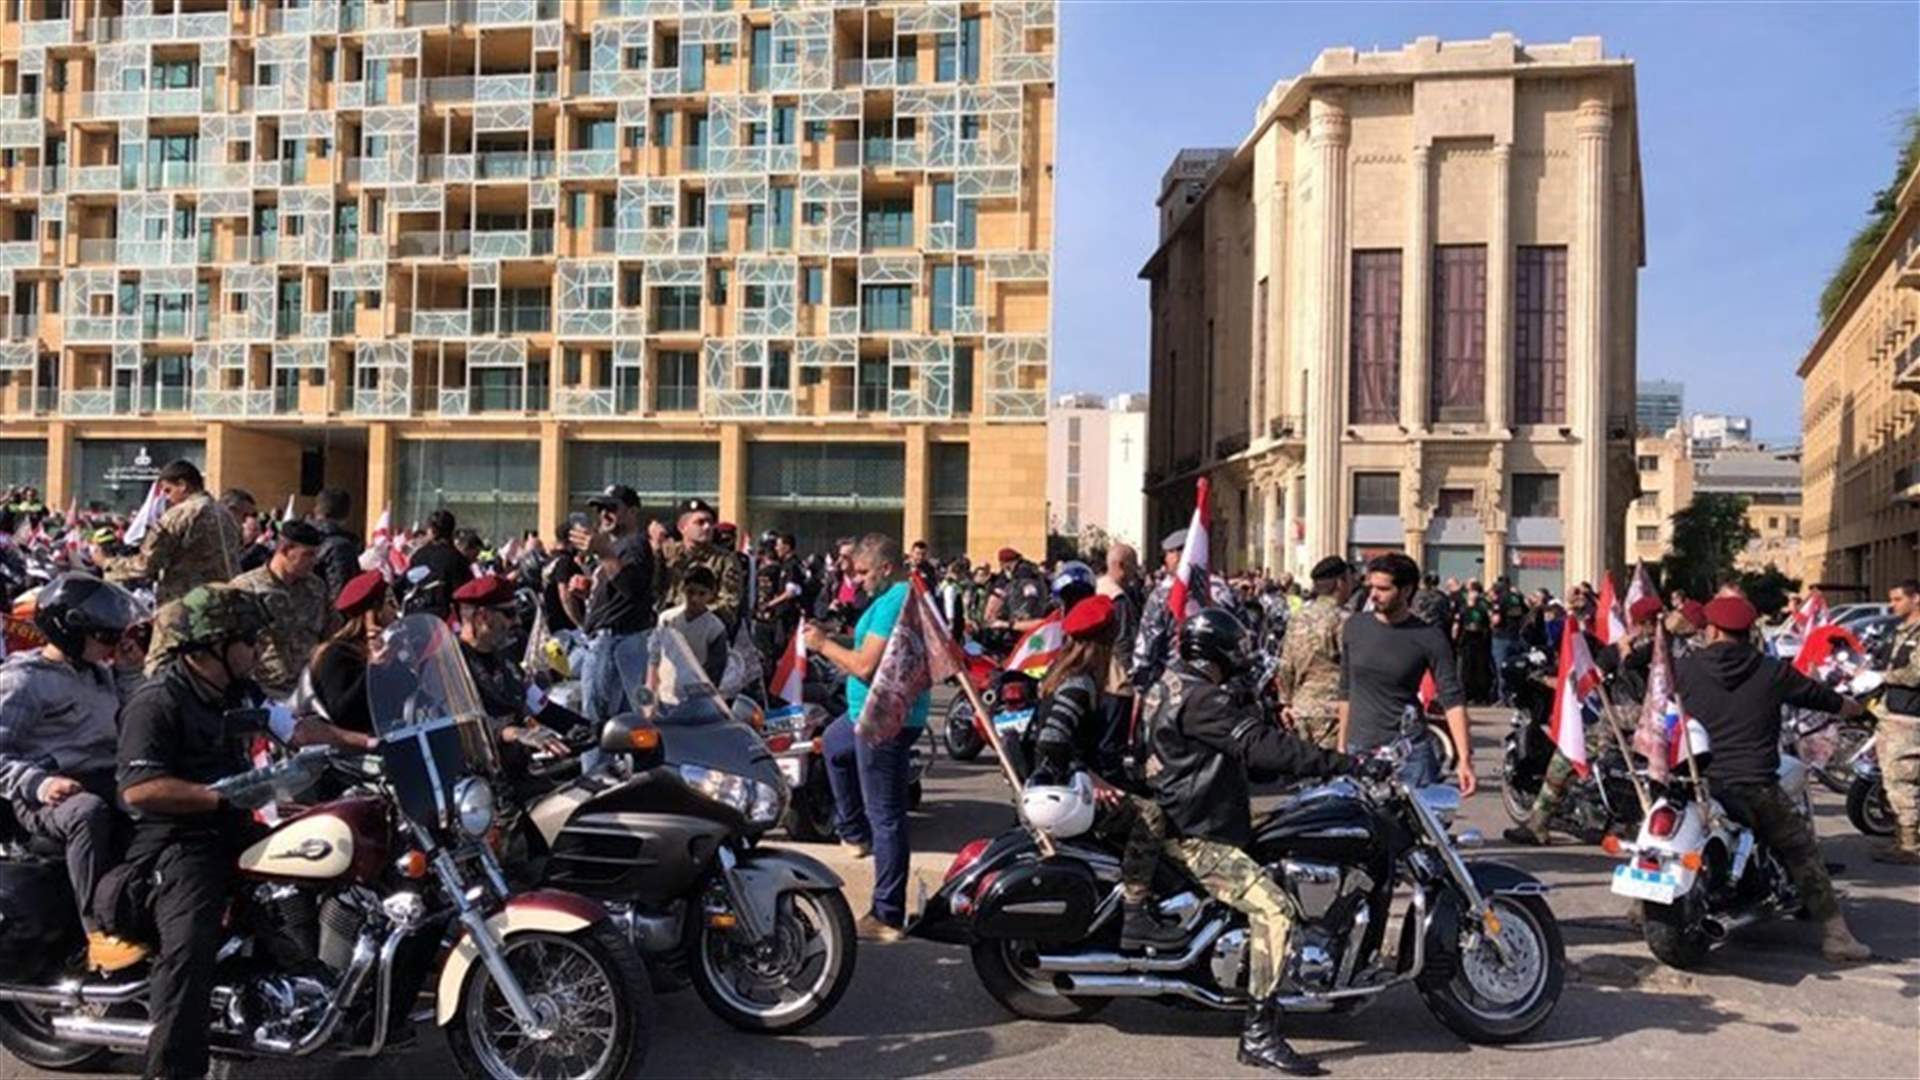 More than 300 bikers celebrate independence in their own way in North Lebanon and Bekaa ​